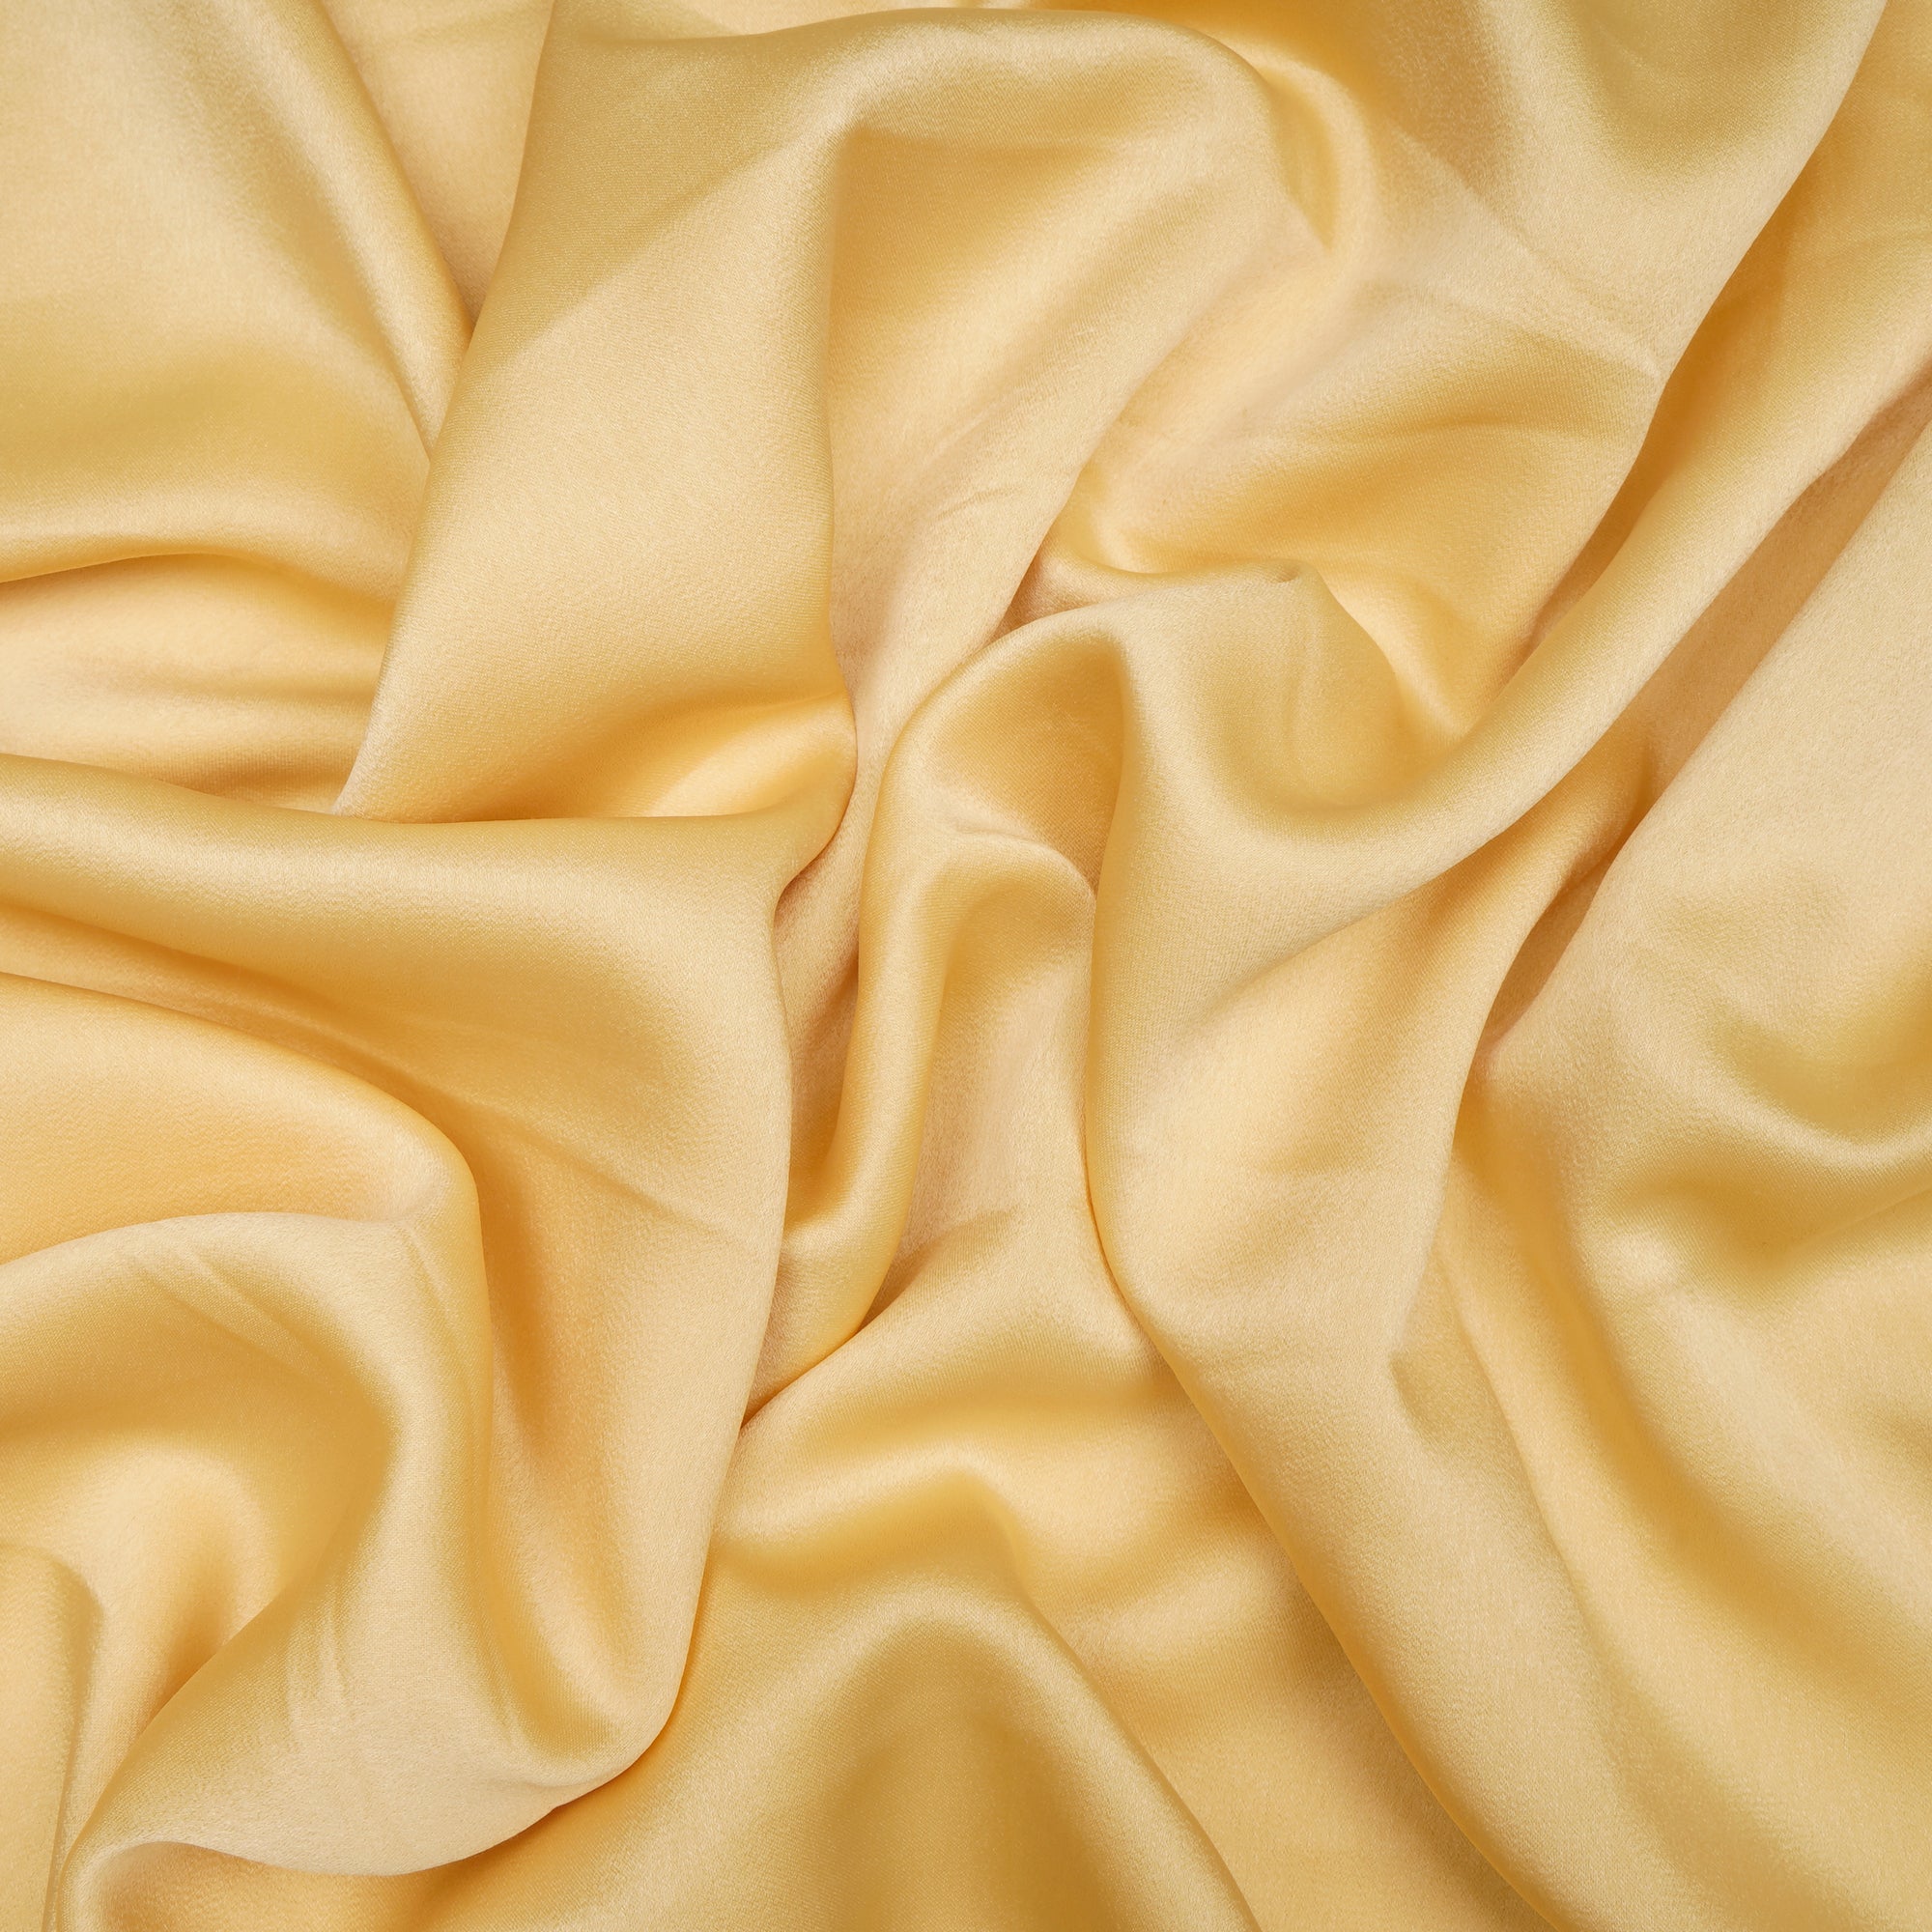 Yarrow Solid Dyed Imported Velvet Satin Fabric (60" Width)